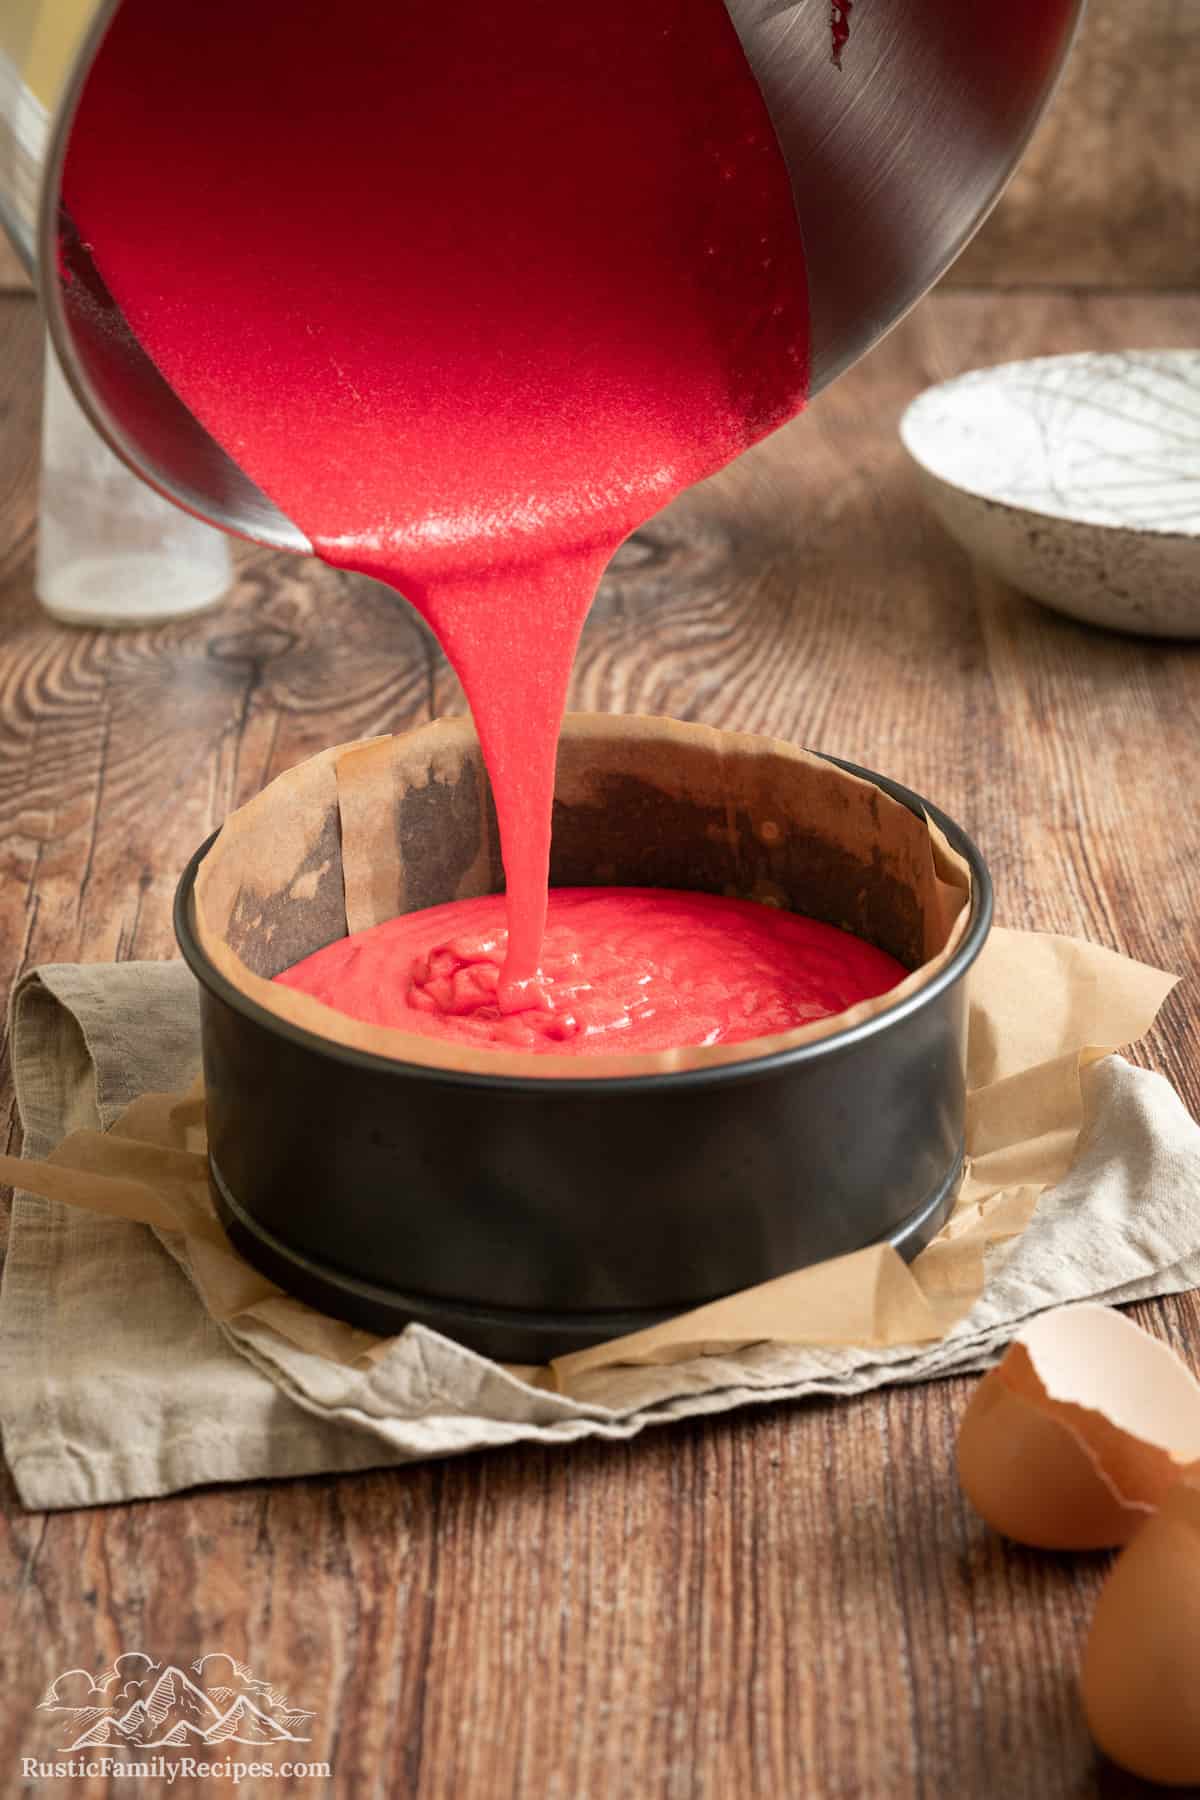 Pink cake mix is poured into a cake pan.